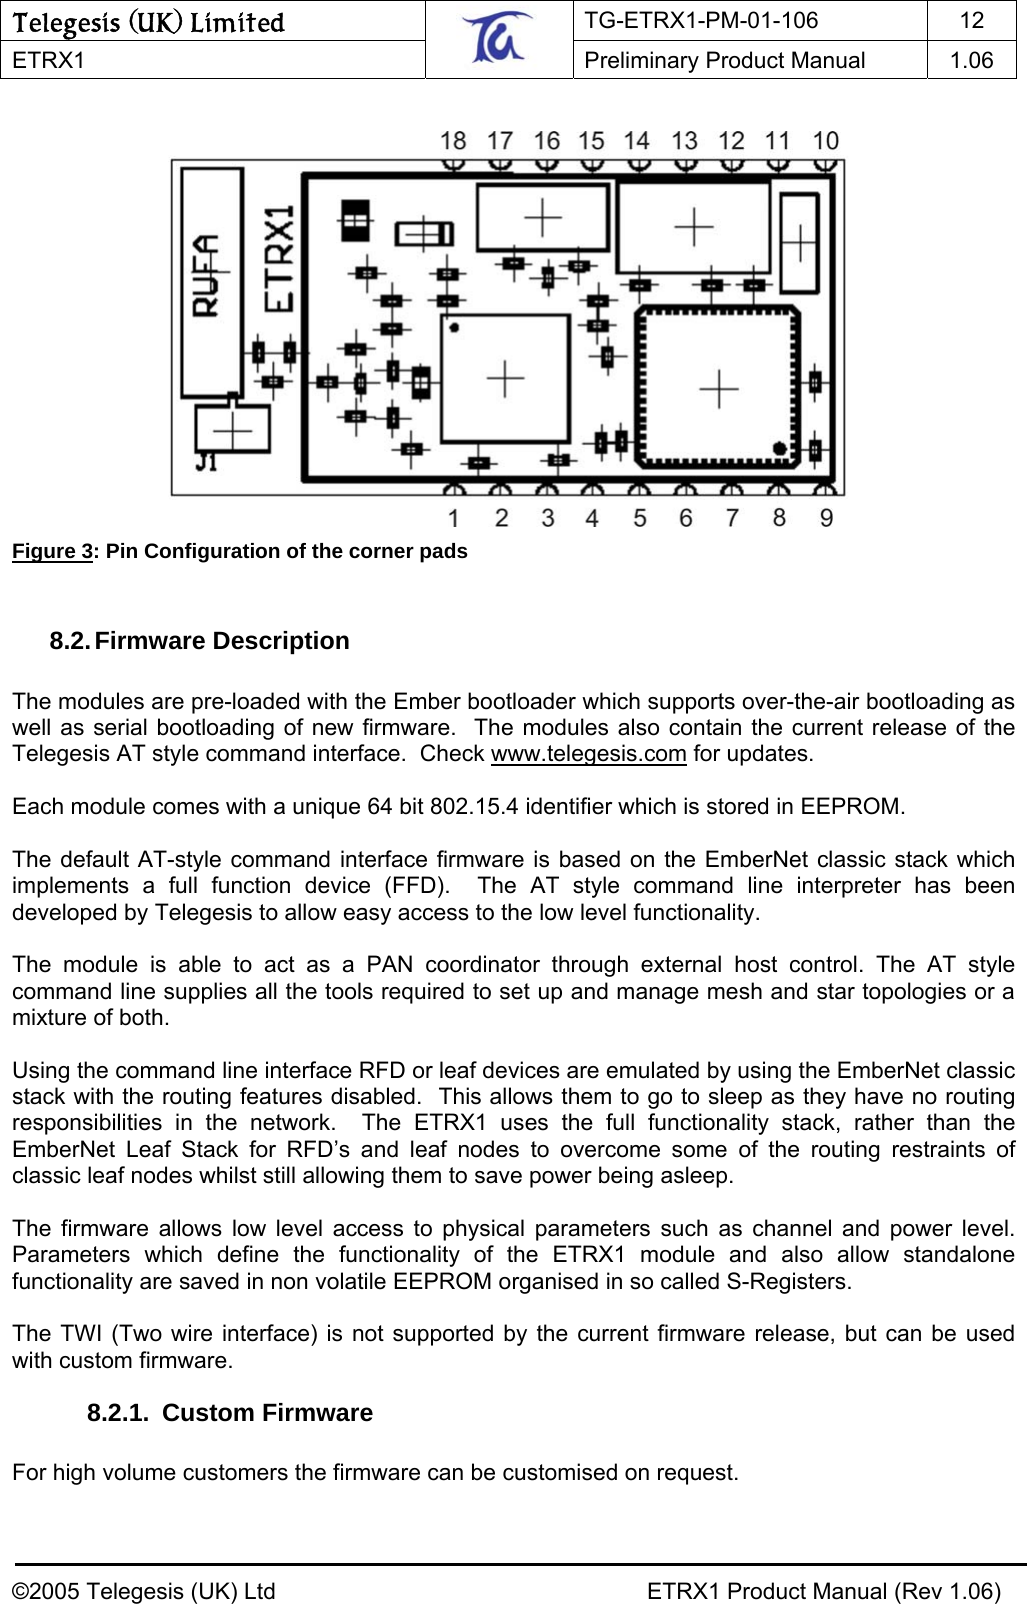 Telegesis (UK) Limited TG-ETRX1-PM-01-106 12  ETRX1    Preliminary Product Manual  1.06     Figure 3: Pin Configuration of the corner pads  8.2. Firmware Description  The modules are pre-loaded with the Ember bootloader which supports over-the-air bootloading as well as serial bootloading of new firmware.  The modules also contain the current release of the Telegesis AT style command interface.  Check www.telegesis.com for updates.  Each module comes with a unique 64 bit 802.15.4 identifier which is stored in EEPROM.  The default AT-style command interface firmware is based on the EmberNet classic stack which implements a full function device (FFD).  The AT style command line interpreter has been developed by Telegesis to allow easy access to the low level functionality.  The module is able to act as a PAN coordinator through external host control. The AT style command line supplies all the tools required to set up and manage mesh and star topologies or a mixture of both.  Using the command line interface RFD or leaf devices are emulated by using the EmberNet classic stack with the routing features disabled.  This allows them to go to sleep as they have no routing responsibilities in the network.  The ETRX1 uses the full functionality stack, rather than the EmberNet Leaf Stack for RFD’s and leaf nodes to overcome some of the routing restraints of classic leaf nodes whilst still allowing them to save power being asleep.  The firmware allows low level access to physical parameters such as channel and power level.  Parameters which define the functionality of the ETRX1 module and also allow standalone functionality are saved in non volatile EEPROM organised in so called S-Registers.  The TWI (Two wire interface) is not supported by the current firmware release, but can be used with custom firmware. 8.2.1. Custom Firmware  For high volume customers the firmware can be customised on request.    ©2005 Telegesis (UK) Ltd    ETRX1 Product Manual (Rev 1.06) 